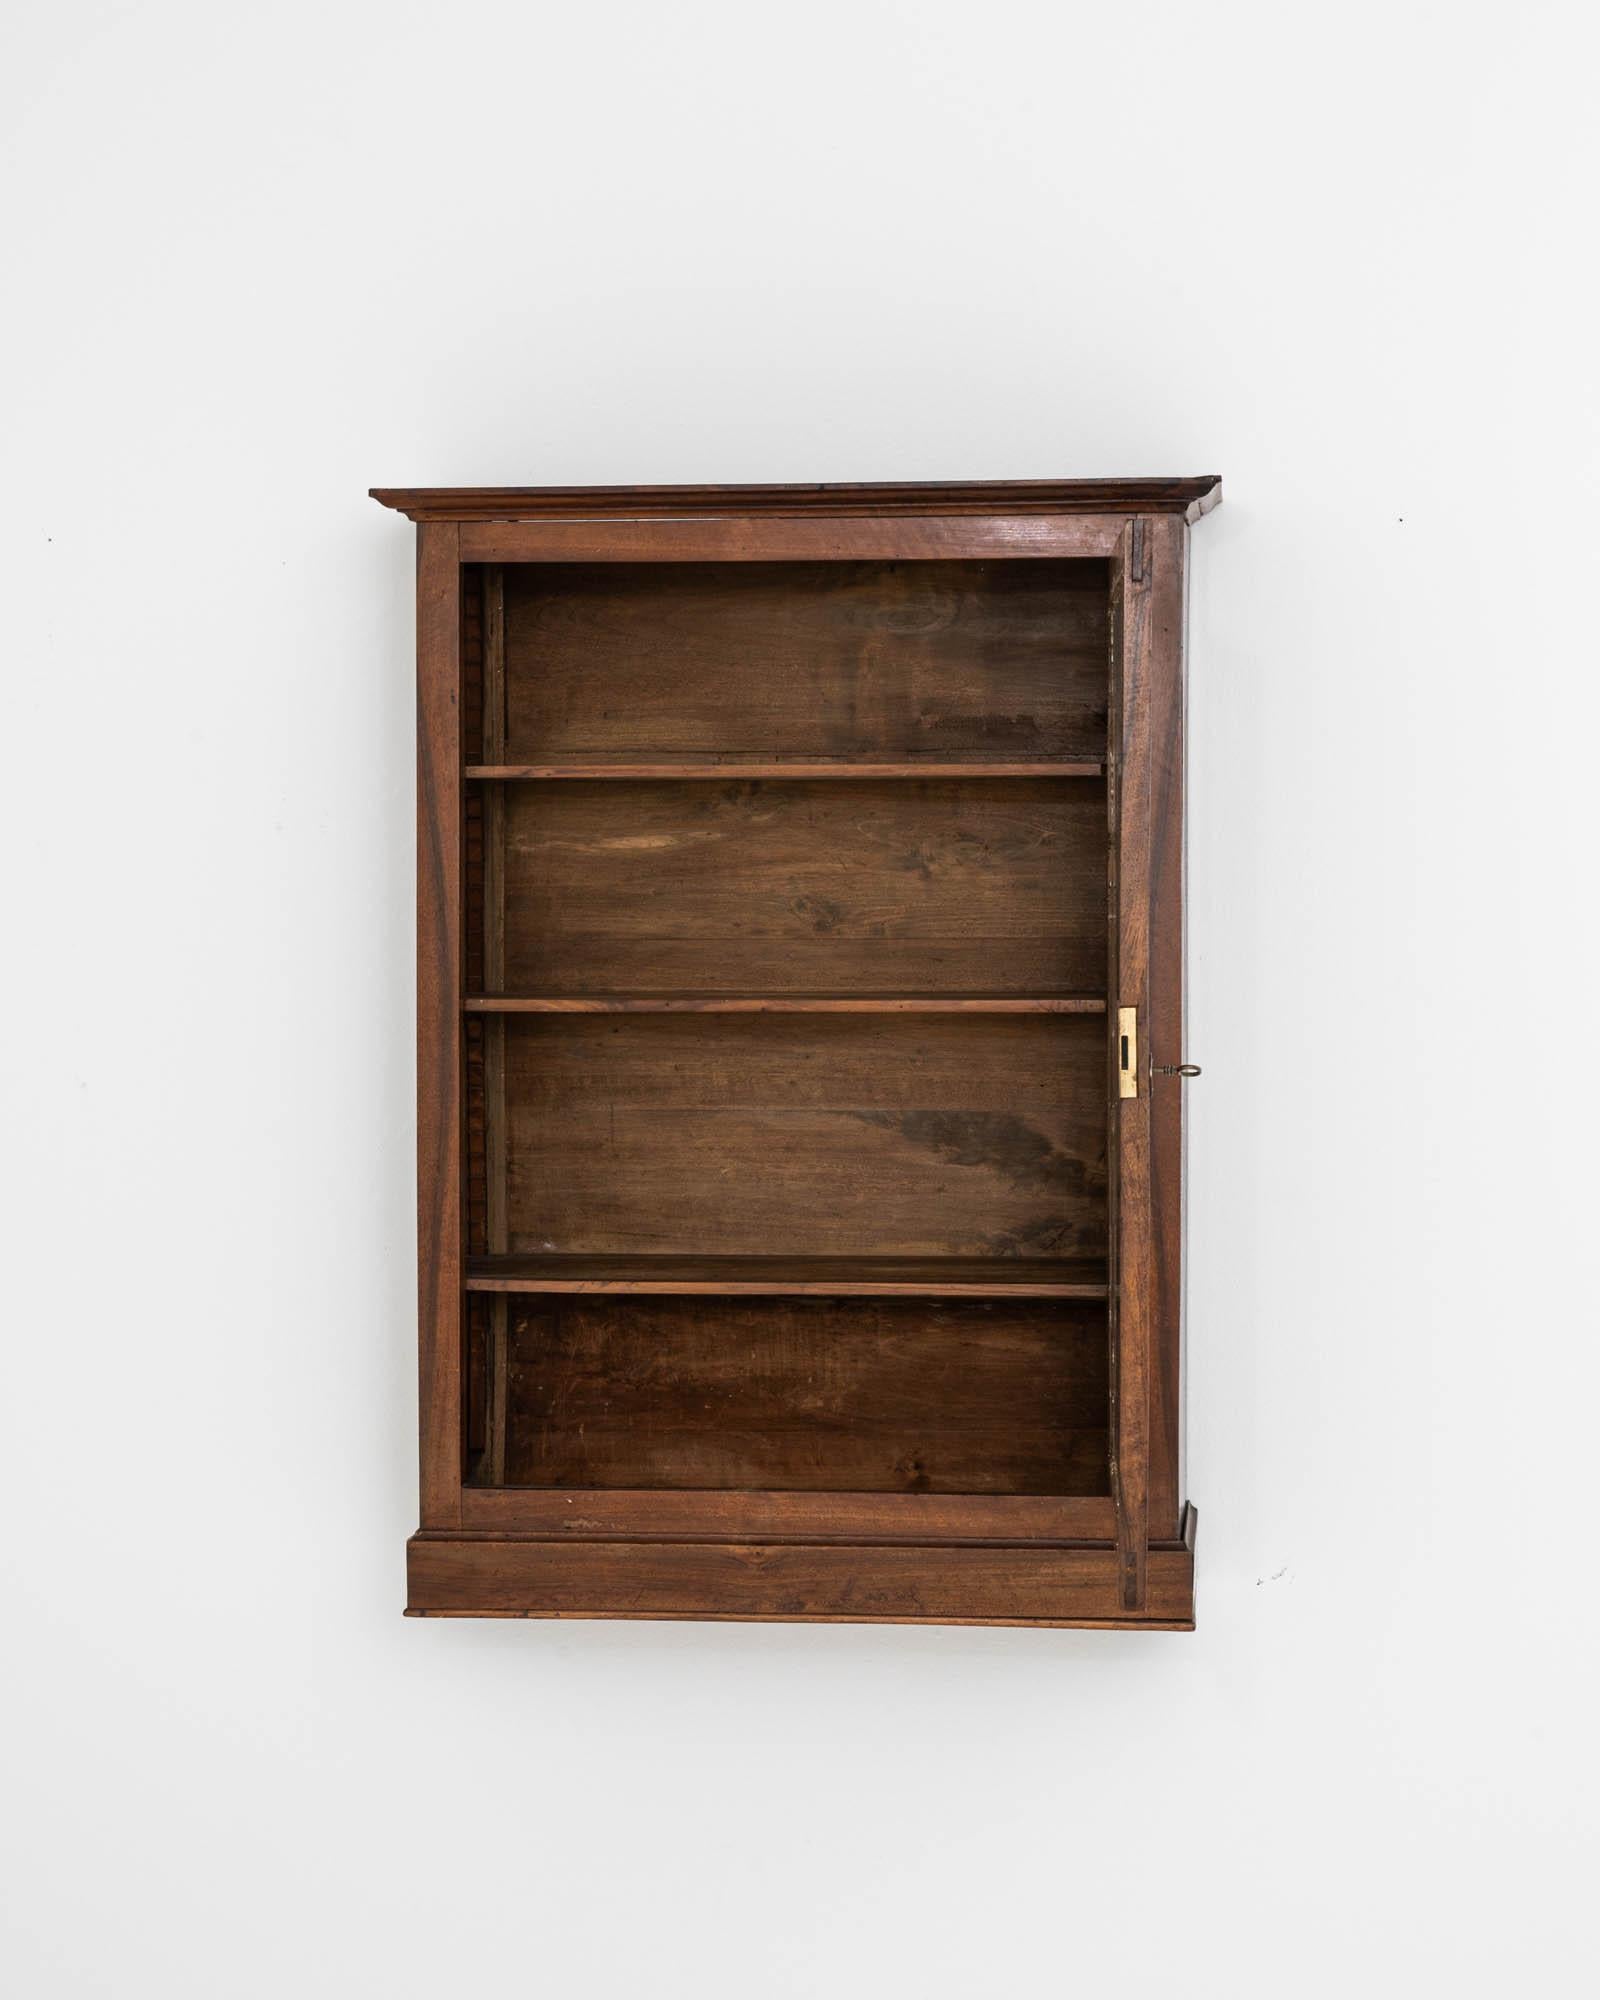 This 18th Century French Wooden Wall Vitrine is a rare gem, steeped in history and crafted with the utmost care. Its aged wood frame boasts a deep, lustrous patina that only centuries can bestow, and the delicate glass front elegantly displays your